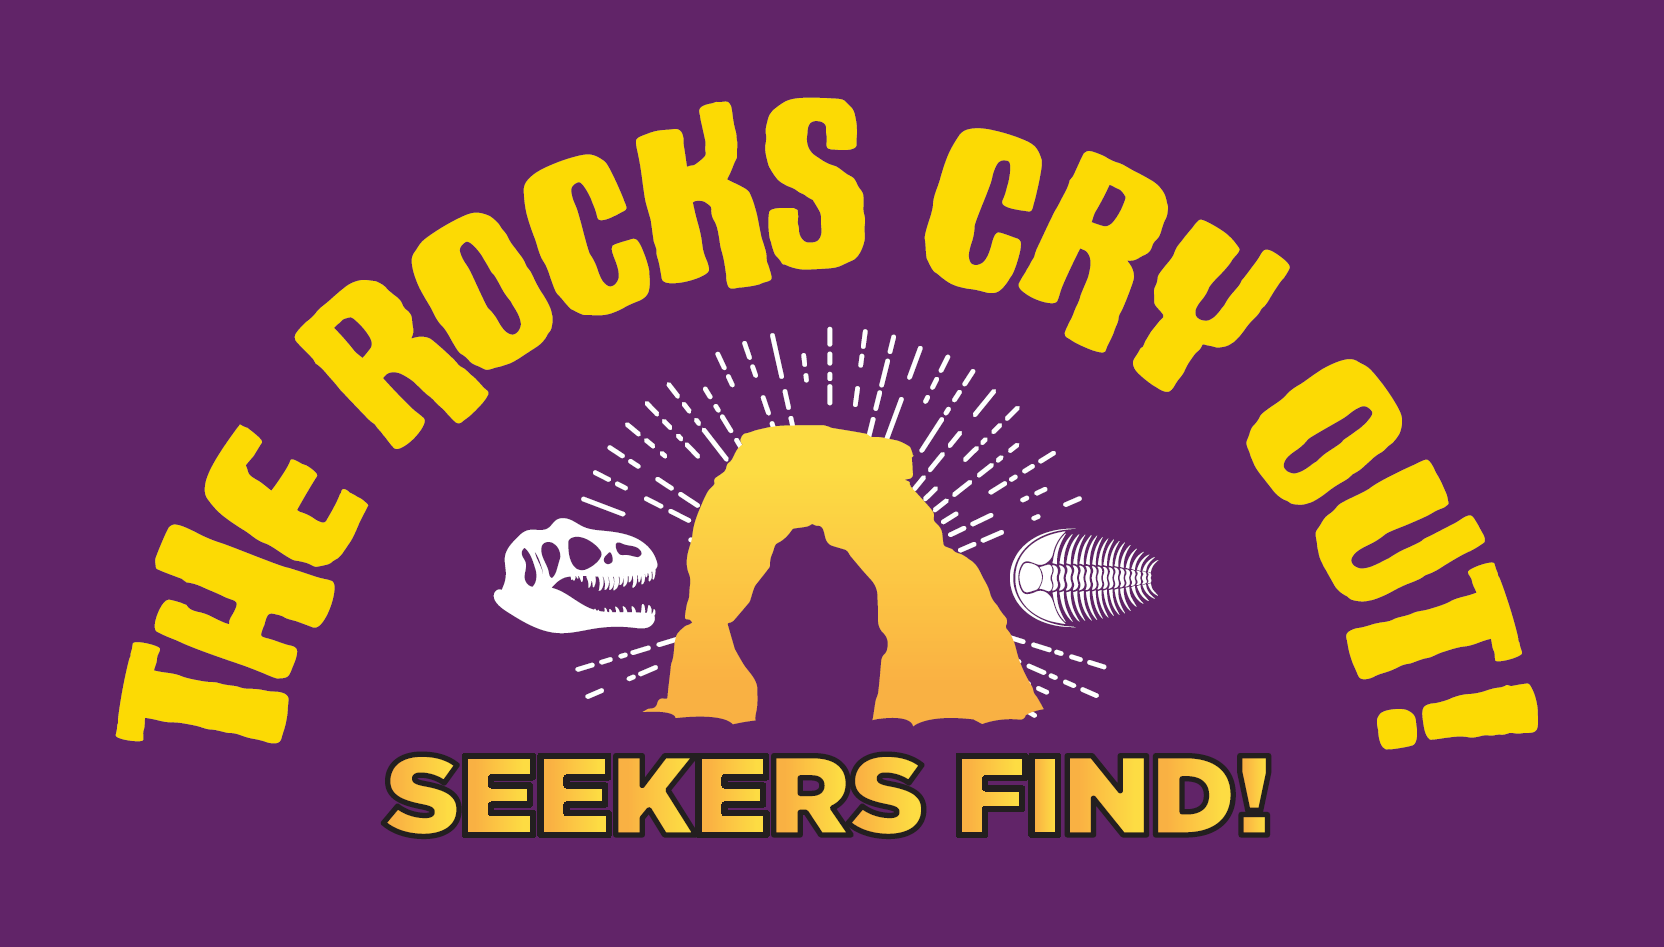 The Rocks Cry Out!